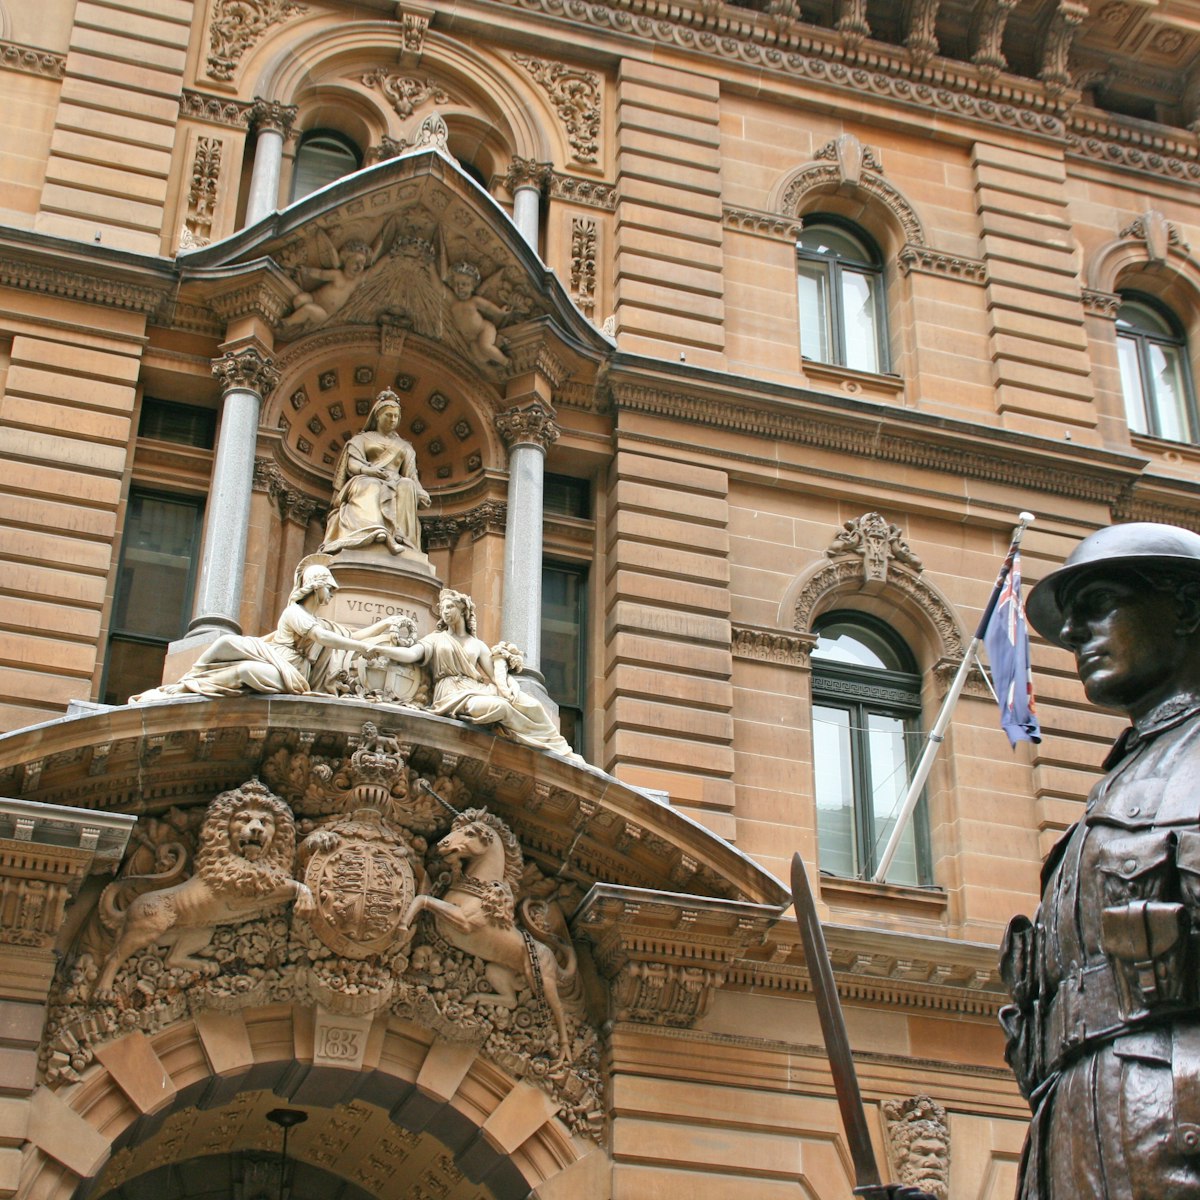 martin place, sydney, A statue of a soldier, australia; Shutterstock ID 86152537; Your name (First / Last): Josh Vogel; Project no. or GL code: 56530; Network activity no. or Cost Centre: Online-Design; Product or Project: 65050/7529/Josh Vogel/LP.com Destination Galleries